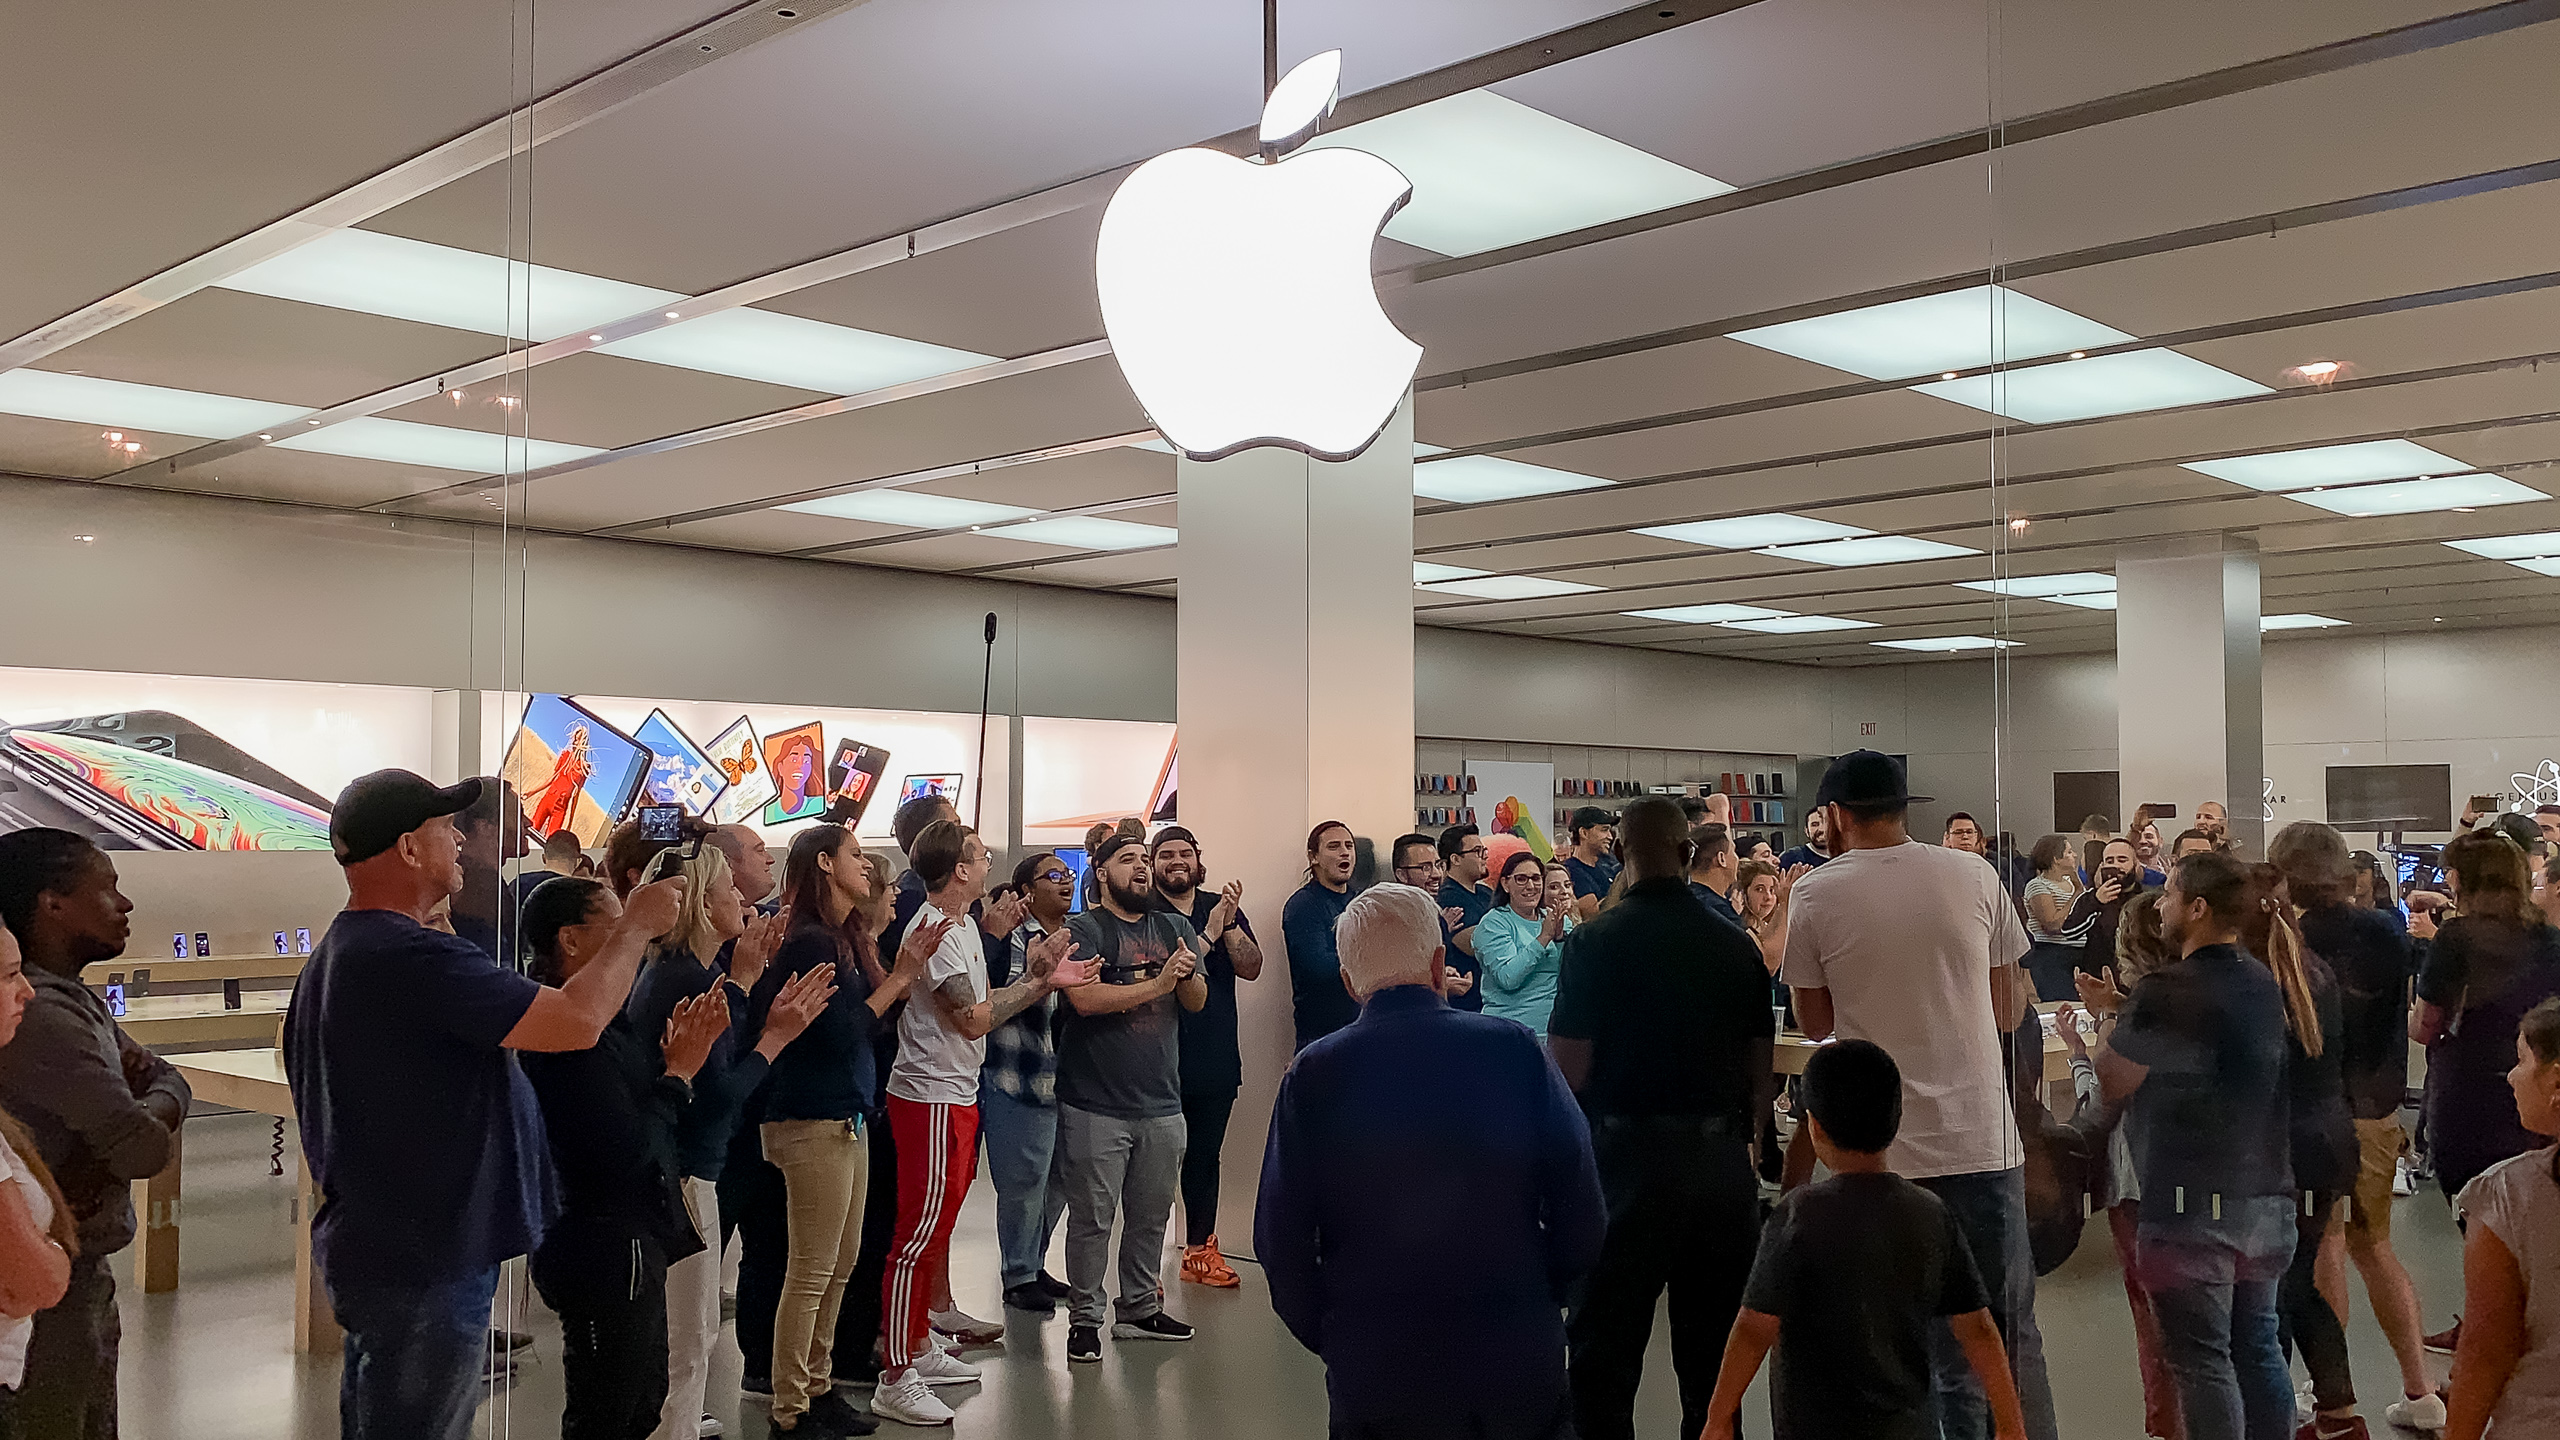 Aventura Apple Store moving to expansive outdoor pavilion on August 10th -  9to5Mac